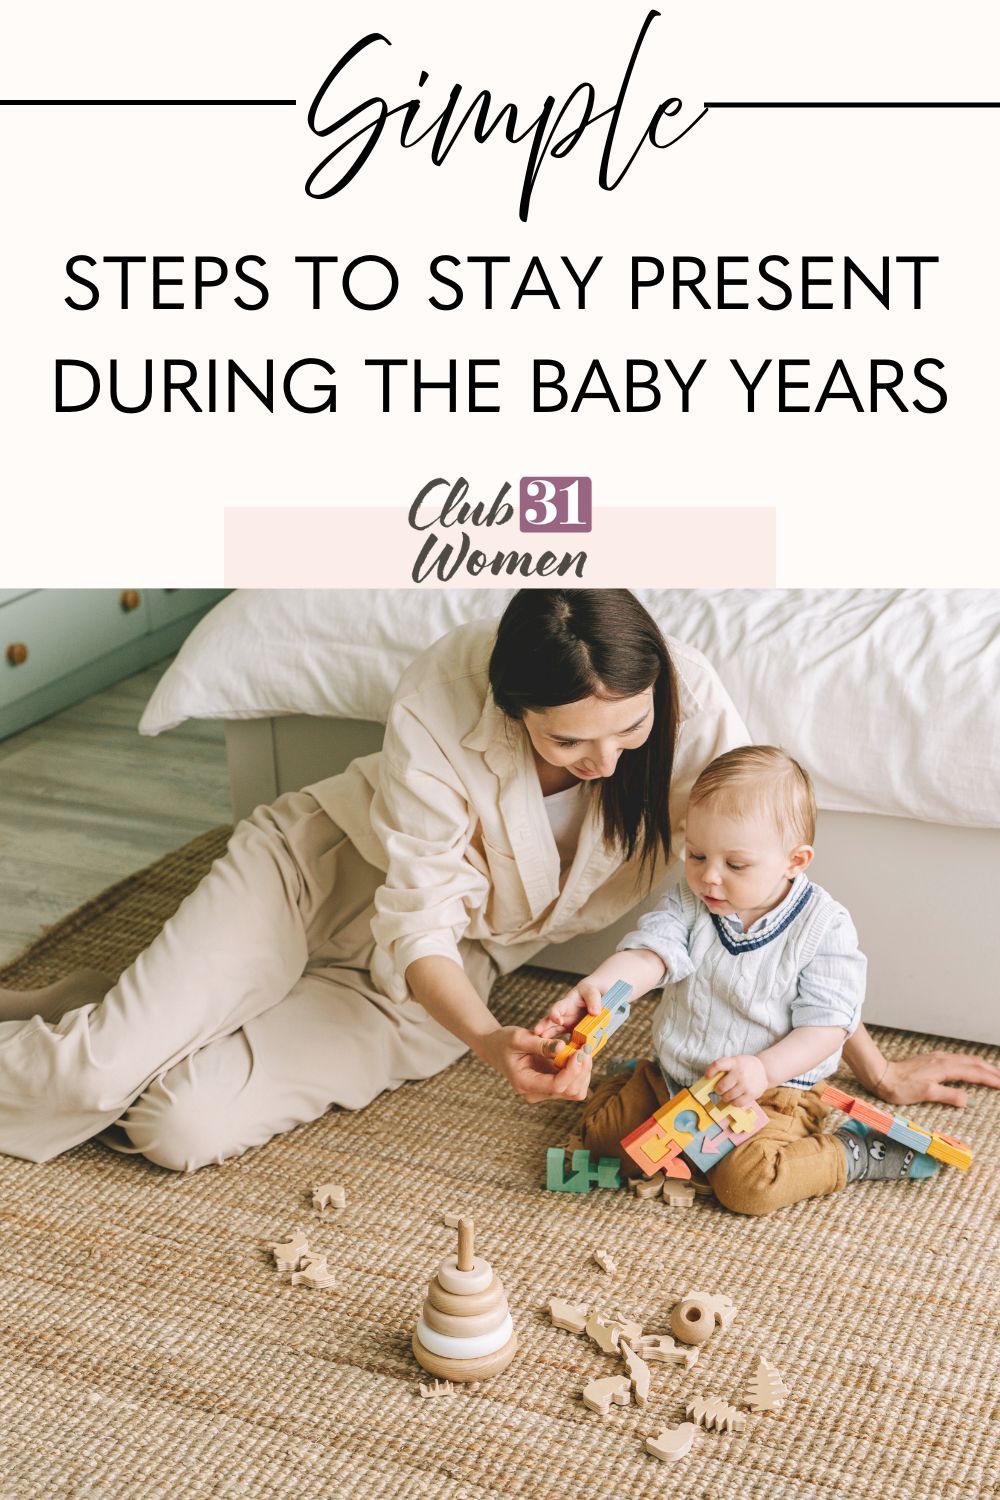 The baby years are years to cherish and be present in. Here are some practical things you can do to stay present and capture the joy. via @Club31Women